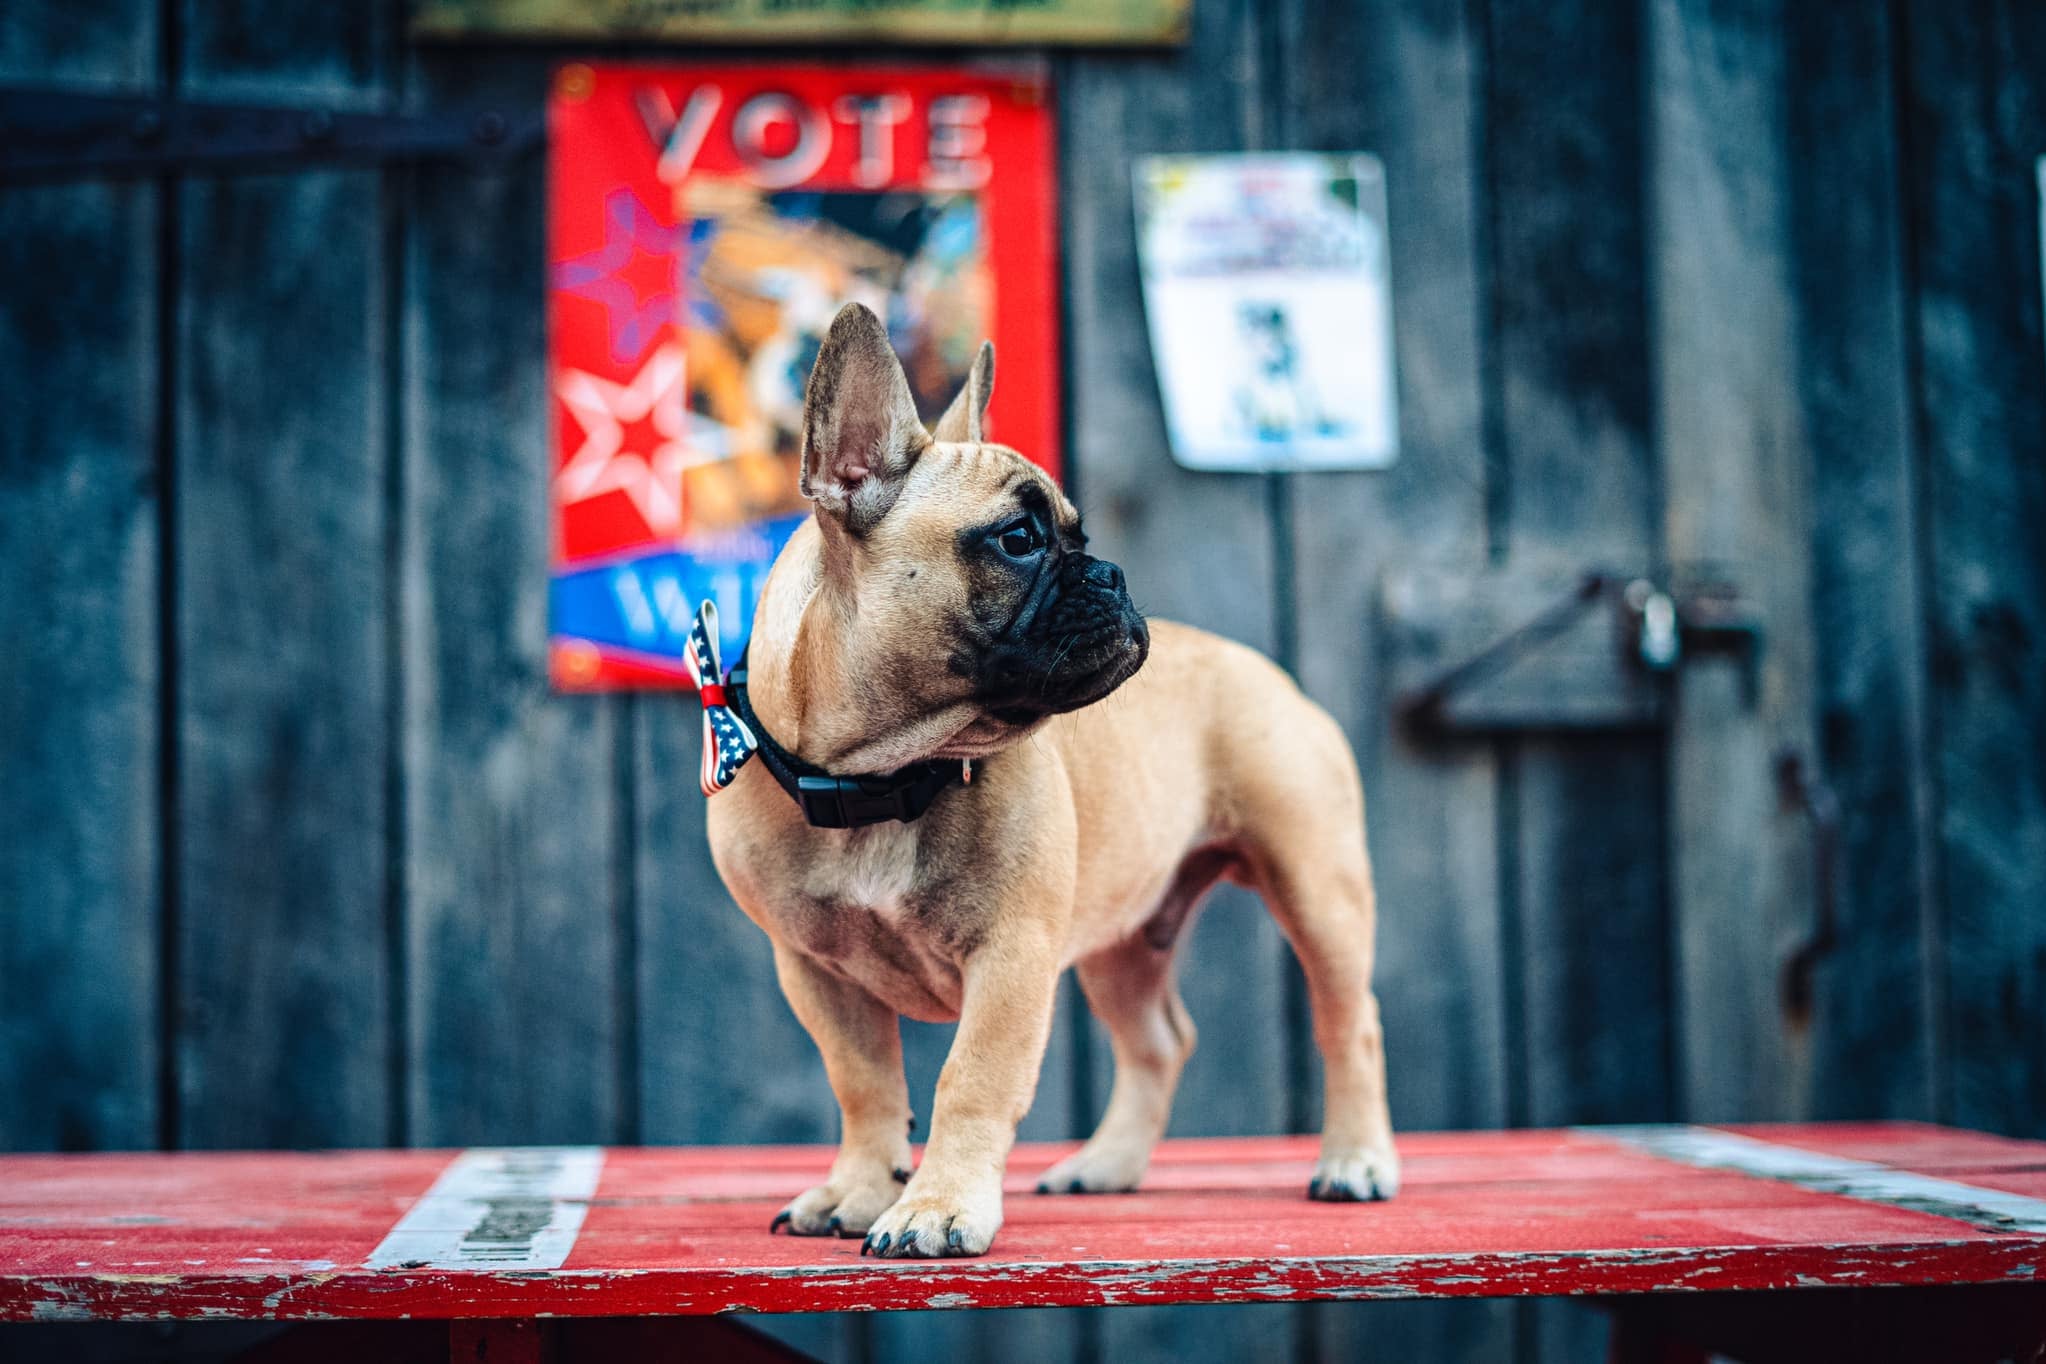 Wilbur the dog standing on a plank of wood, with a VOTE sign in the background